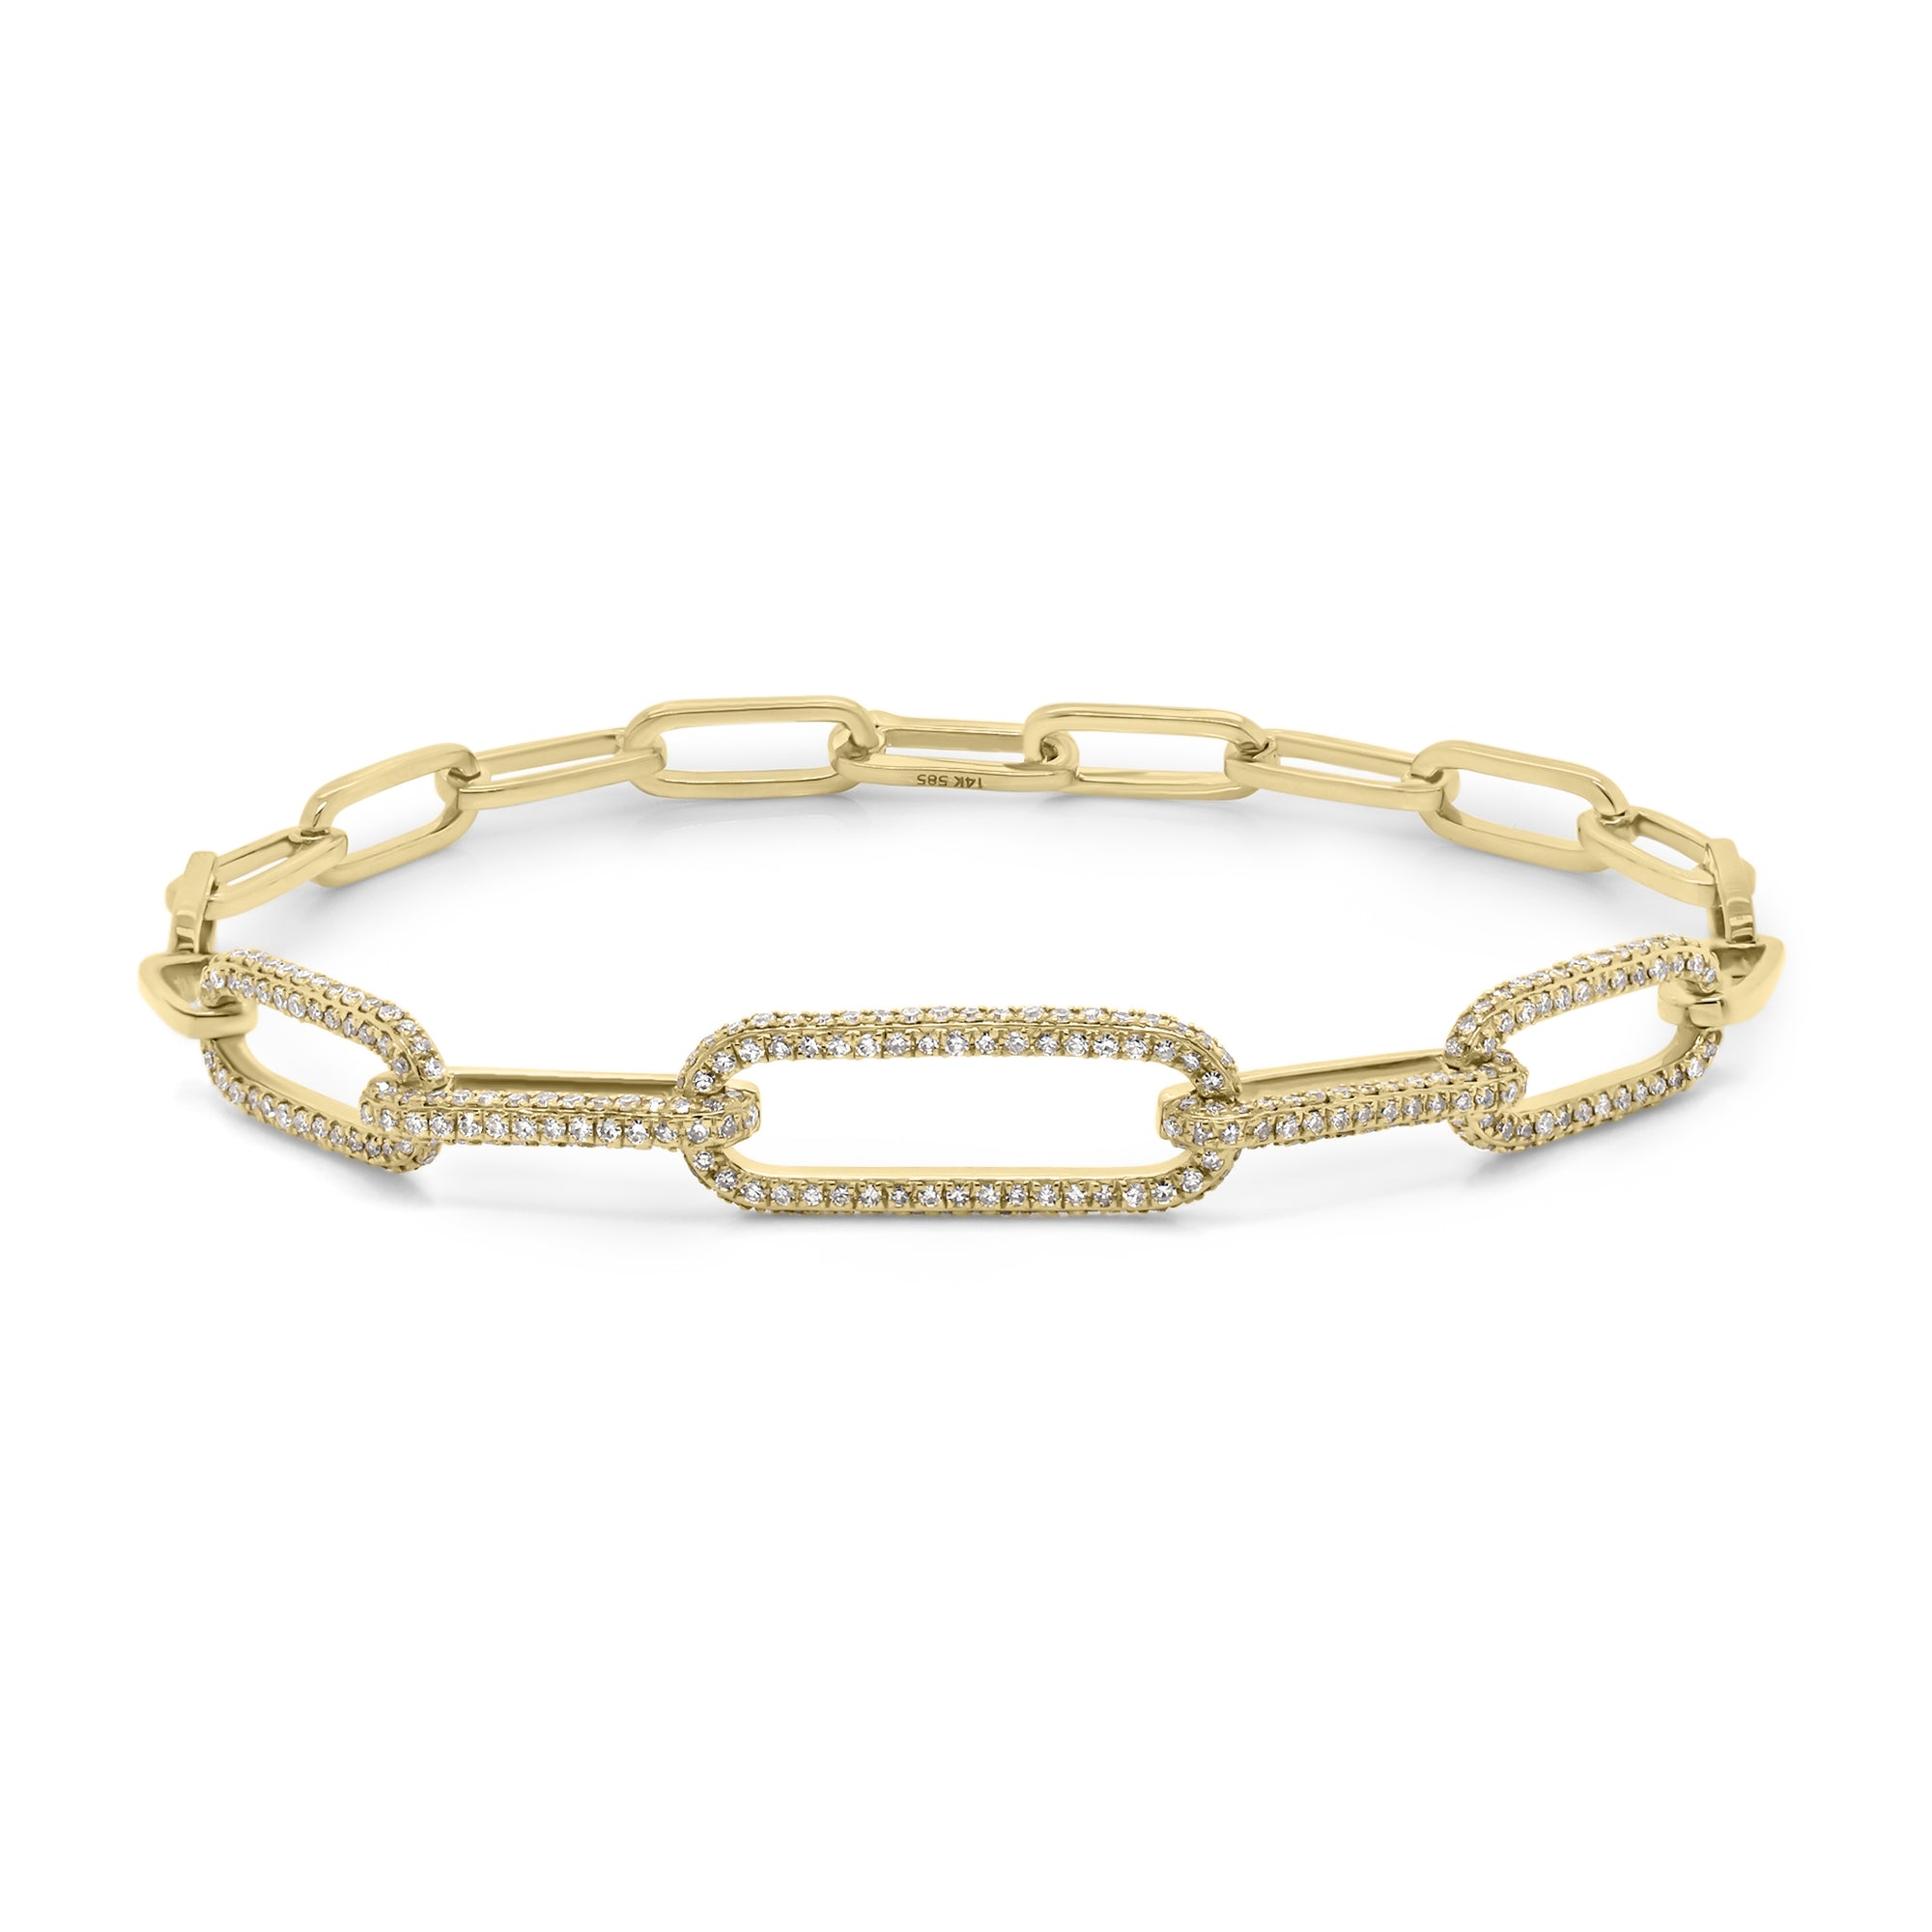 Diamond Paperclip Chain Bracelet - 14K yellow gold weighing 8.00 grams - 374 round diamonds totaling 1.20 carats